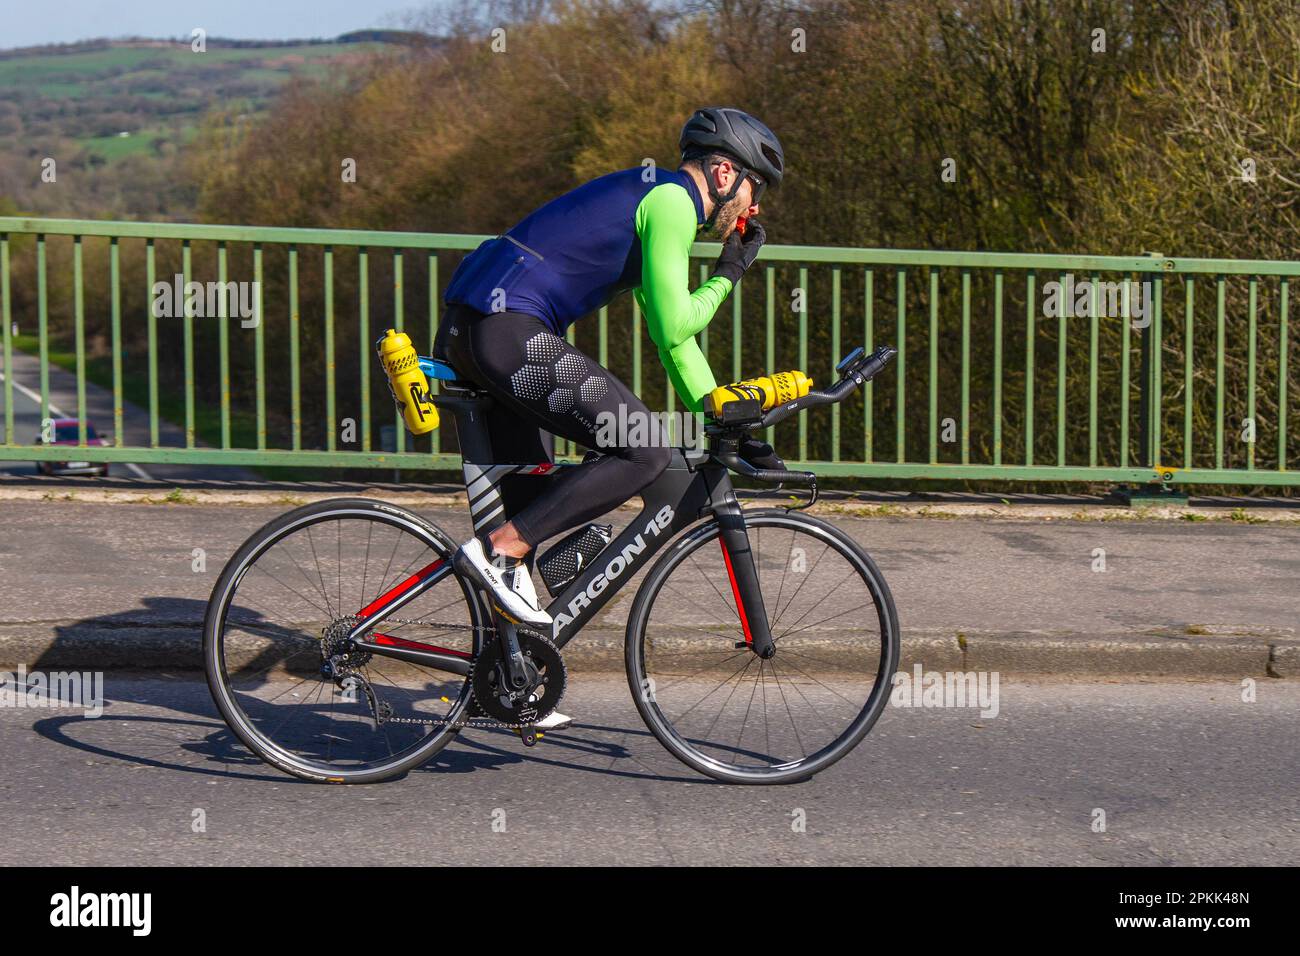 Male cyclist riding ARGON 18, Krypton Pro bicycle crossing motorway bridge in Greater Manchester, UK Stock Photo